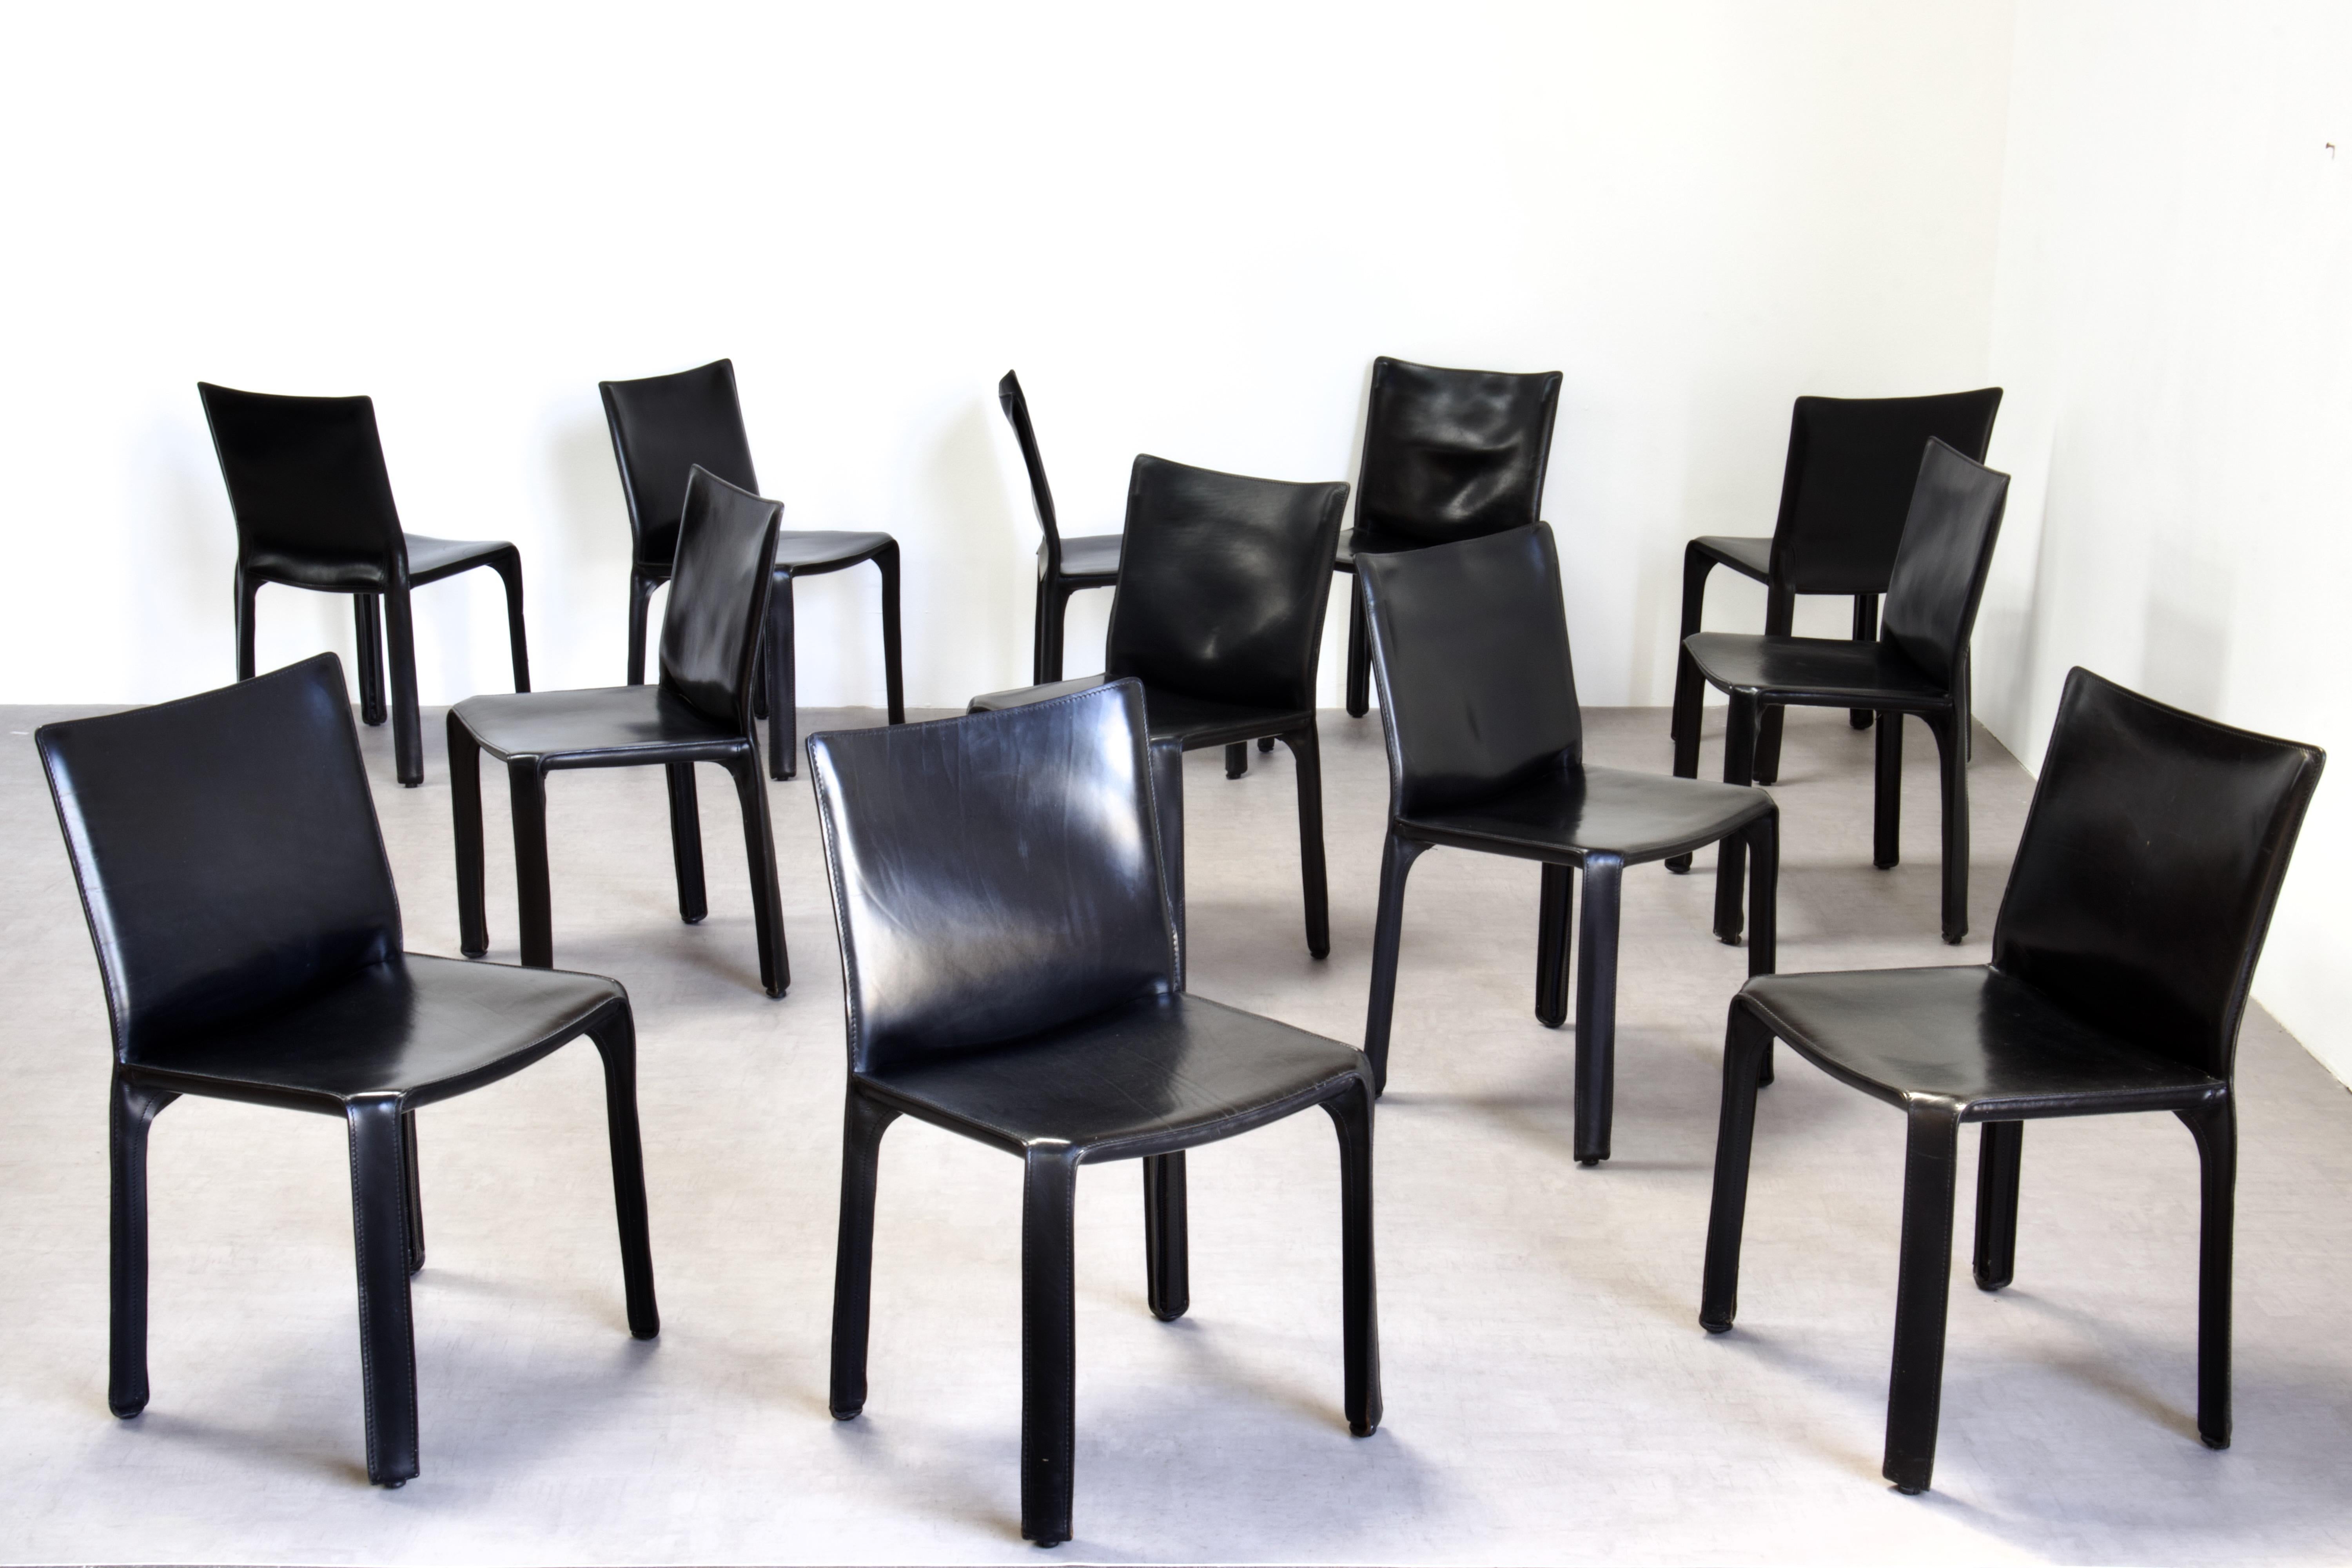 Set of 12 Mario Bellini CAB 412 chairs, made by Cassina in the 1980s. Flexible steel frame covered with a skin of high quality black saddle leather. This elegant, versatile chair is equally suitable for the dining room, study or living room. Maker's